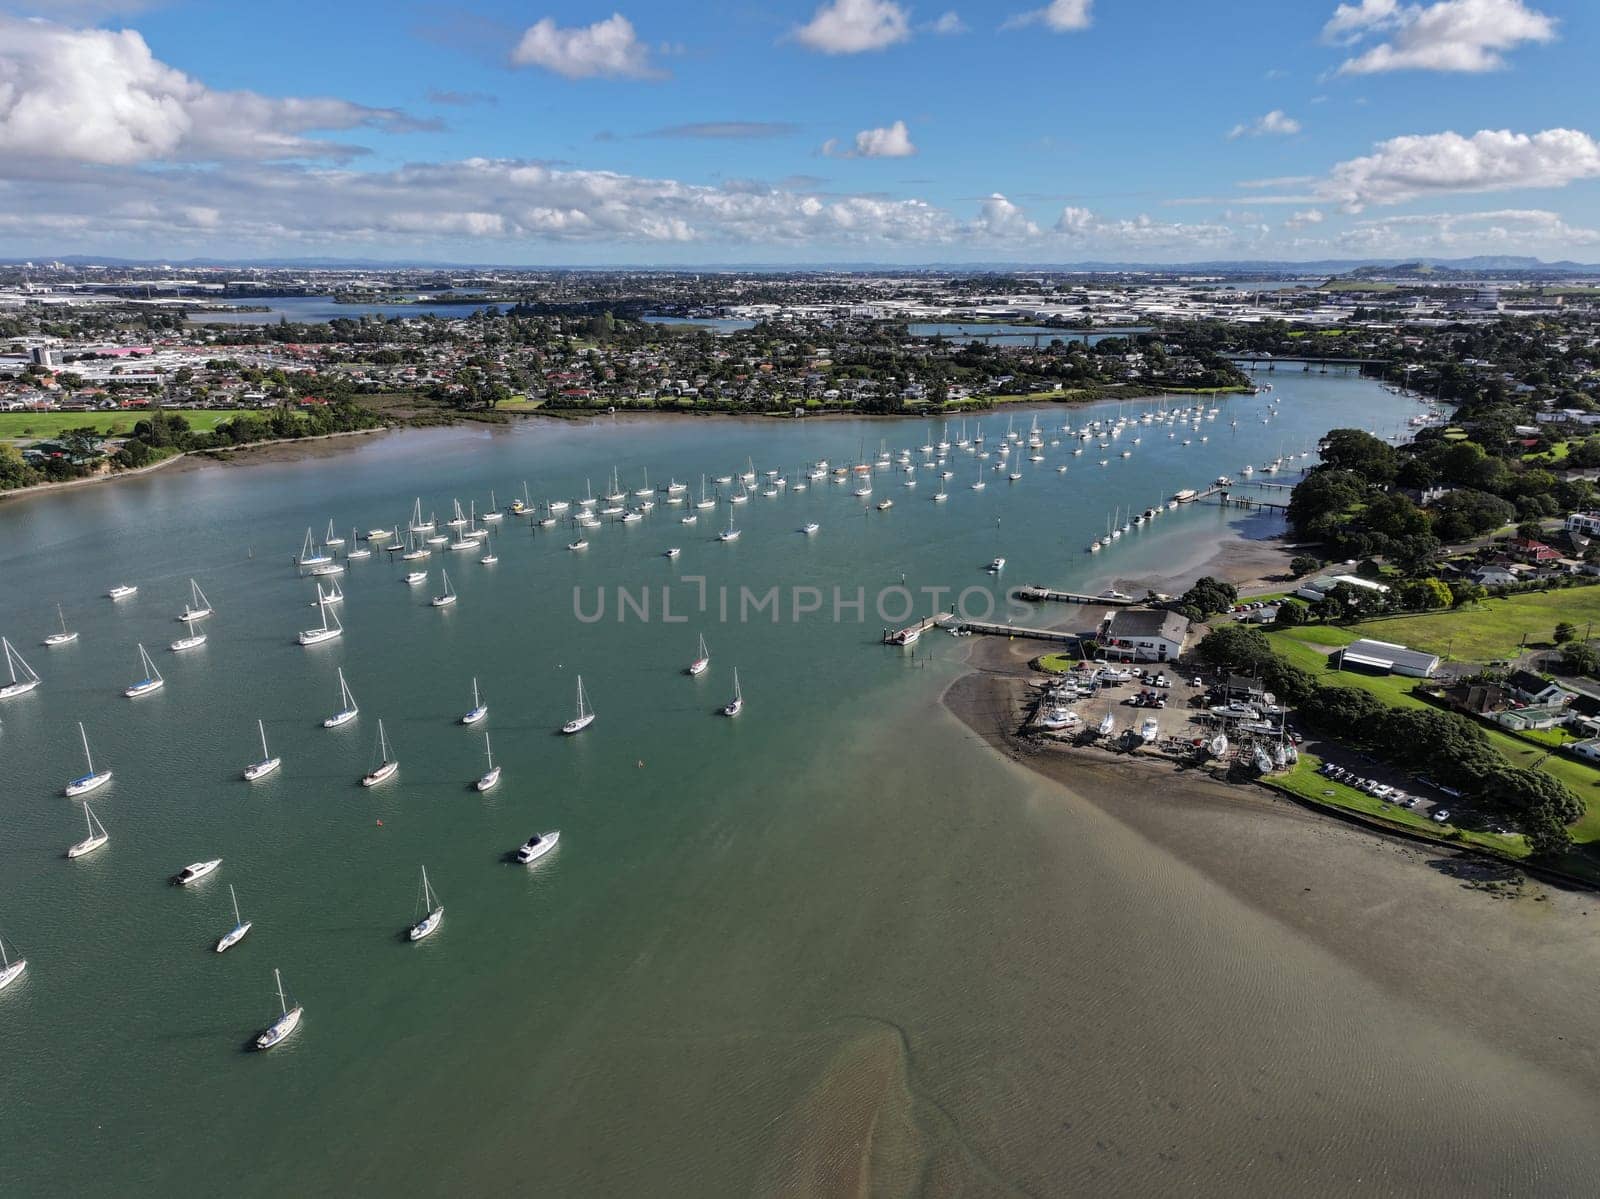 Panoramic view of boats on the Tamaki river at sunset in Auckland, NZ by StefanMal